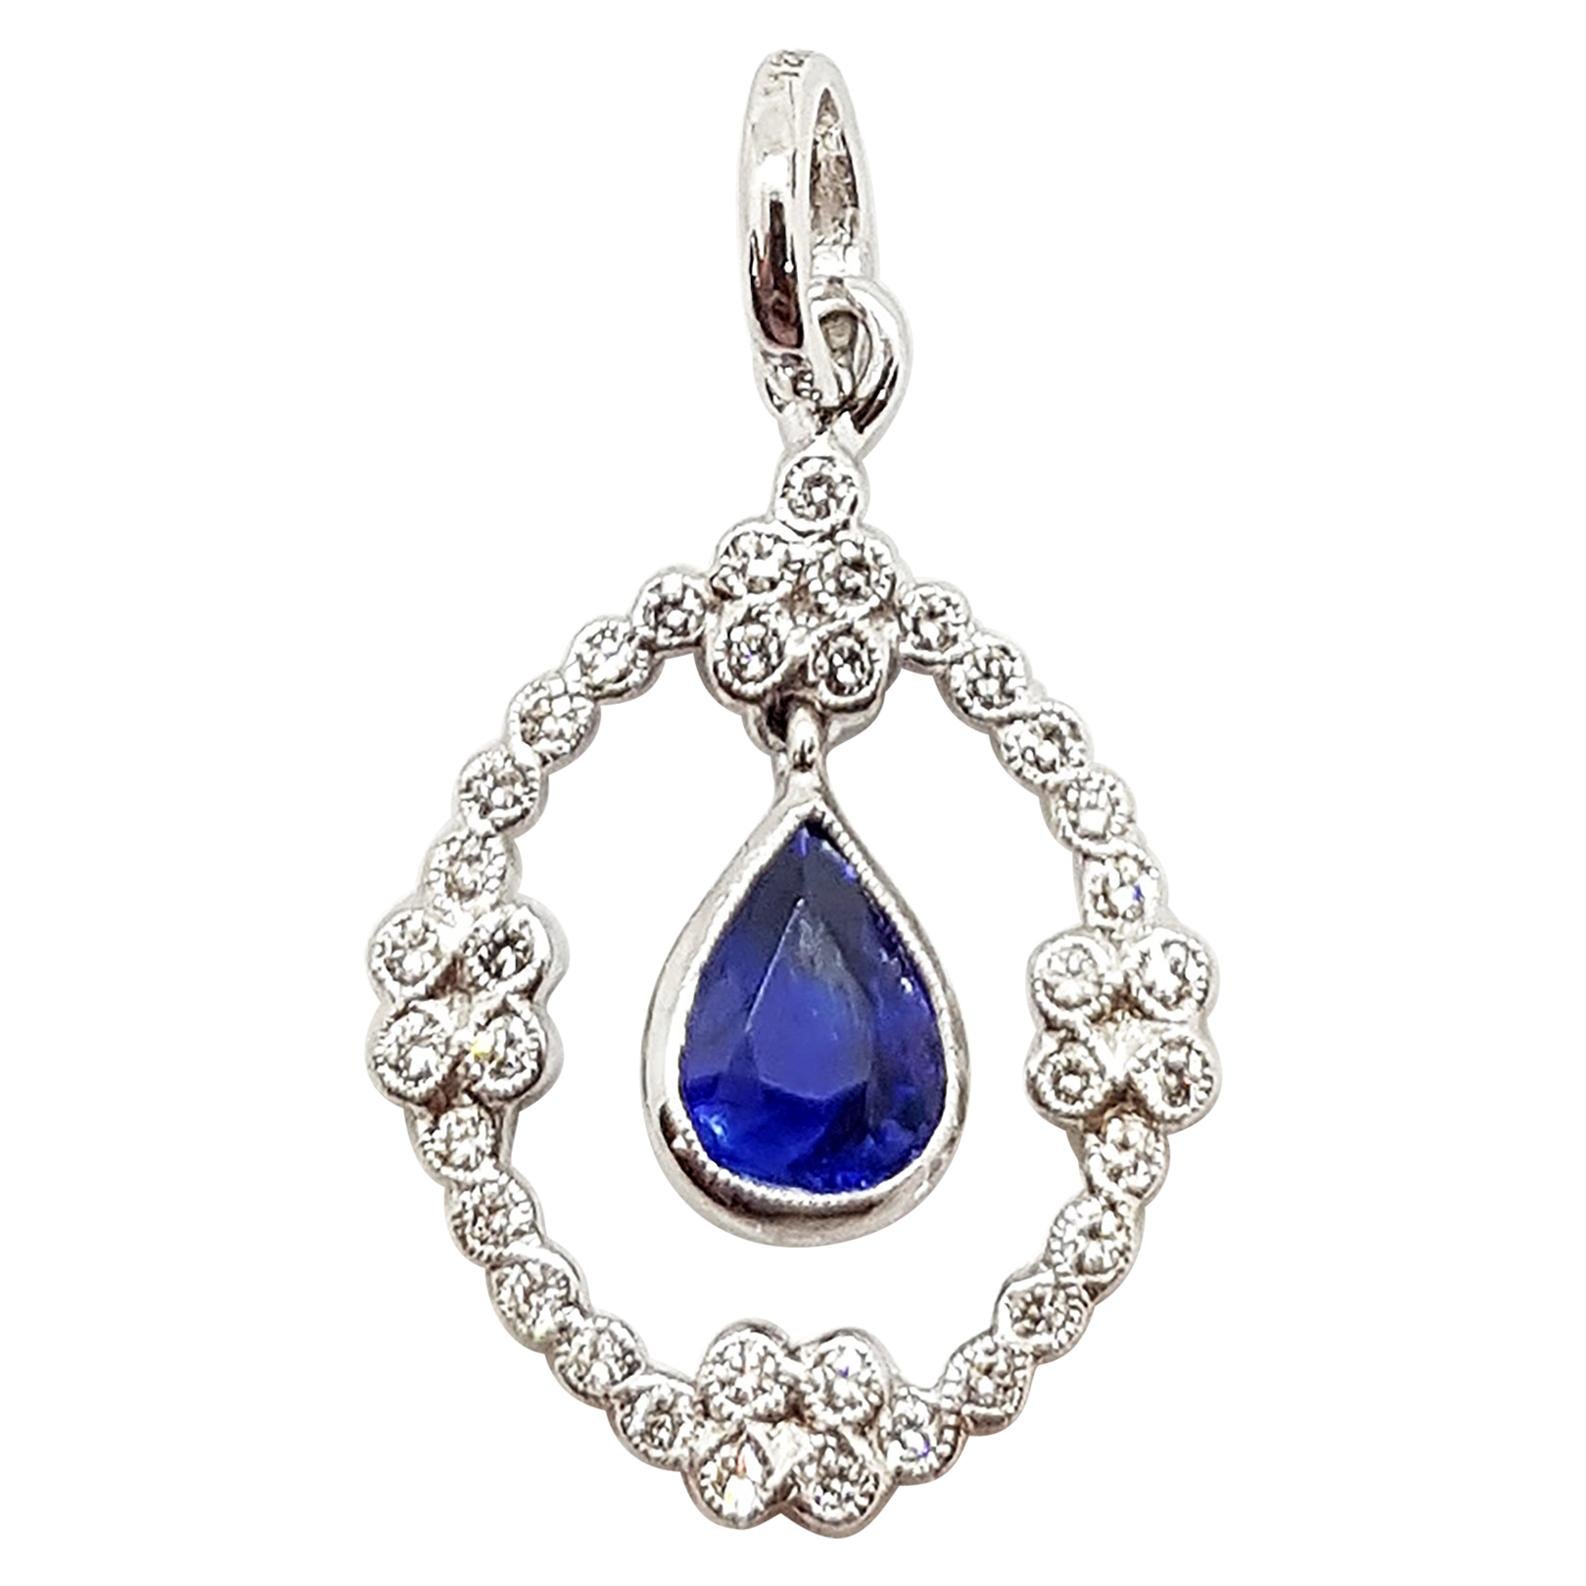 Blue Sapphire 0.85 carat with Diamond 0.25 carat Pendant set in 18 Karat White Gold Settings
(chain not included)

Width:  1.5 cm 
Length: 2.2 cm
Total Weight: 3.58 grams

